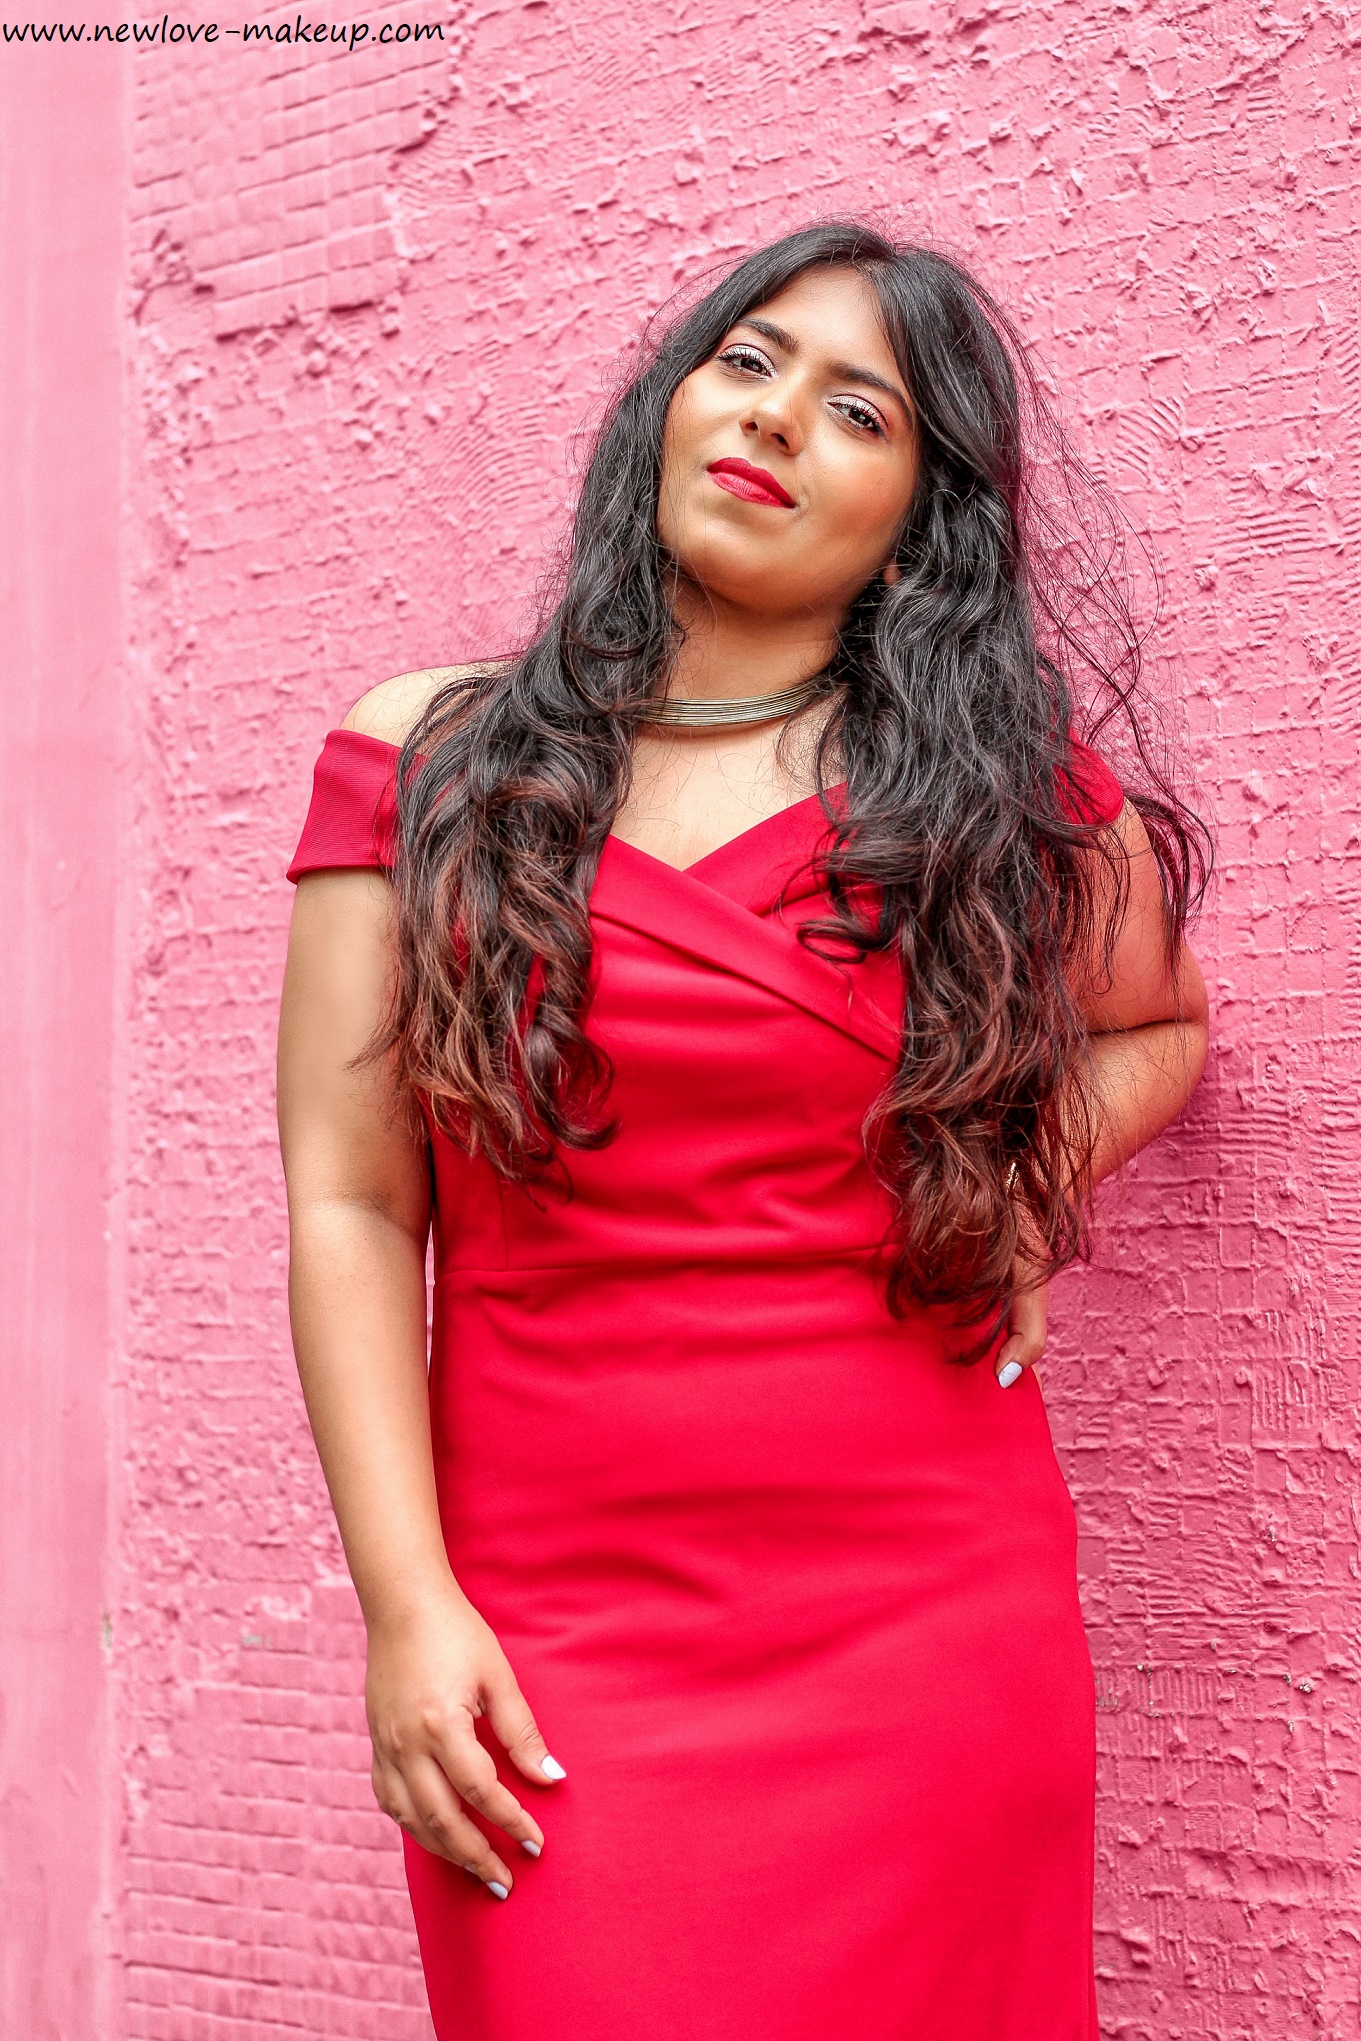 OOTD: The Perfect Red Dress | Retro Glam, Indian Fashion Blog